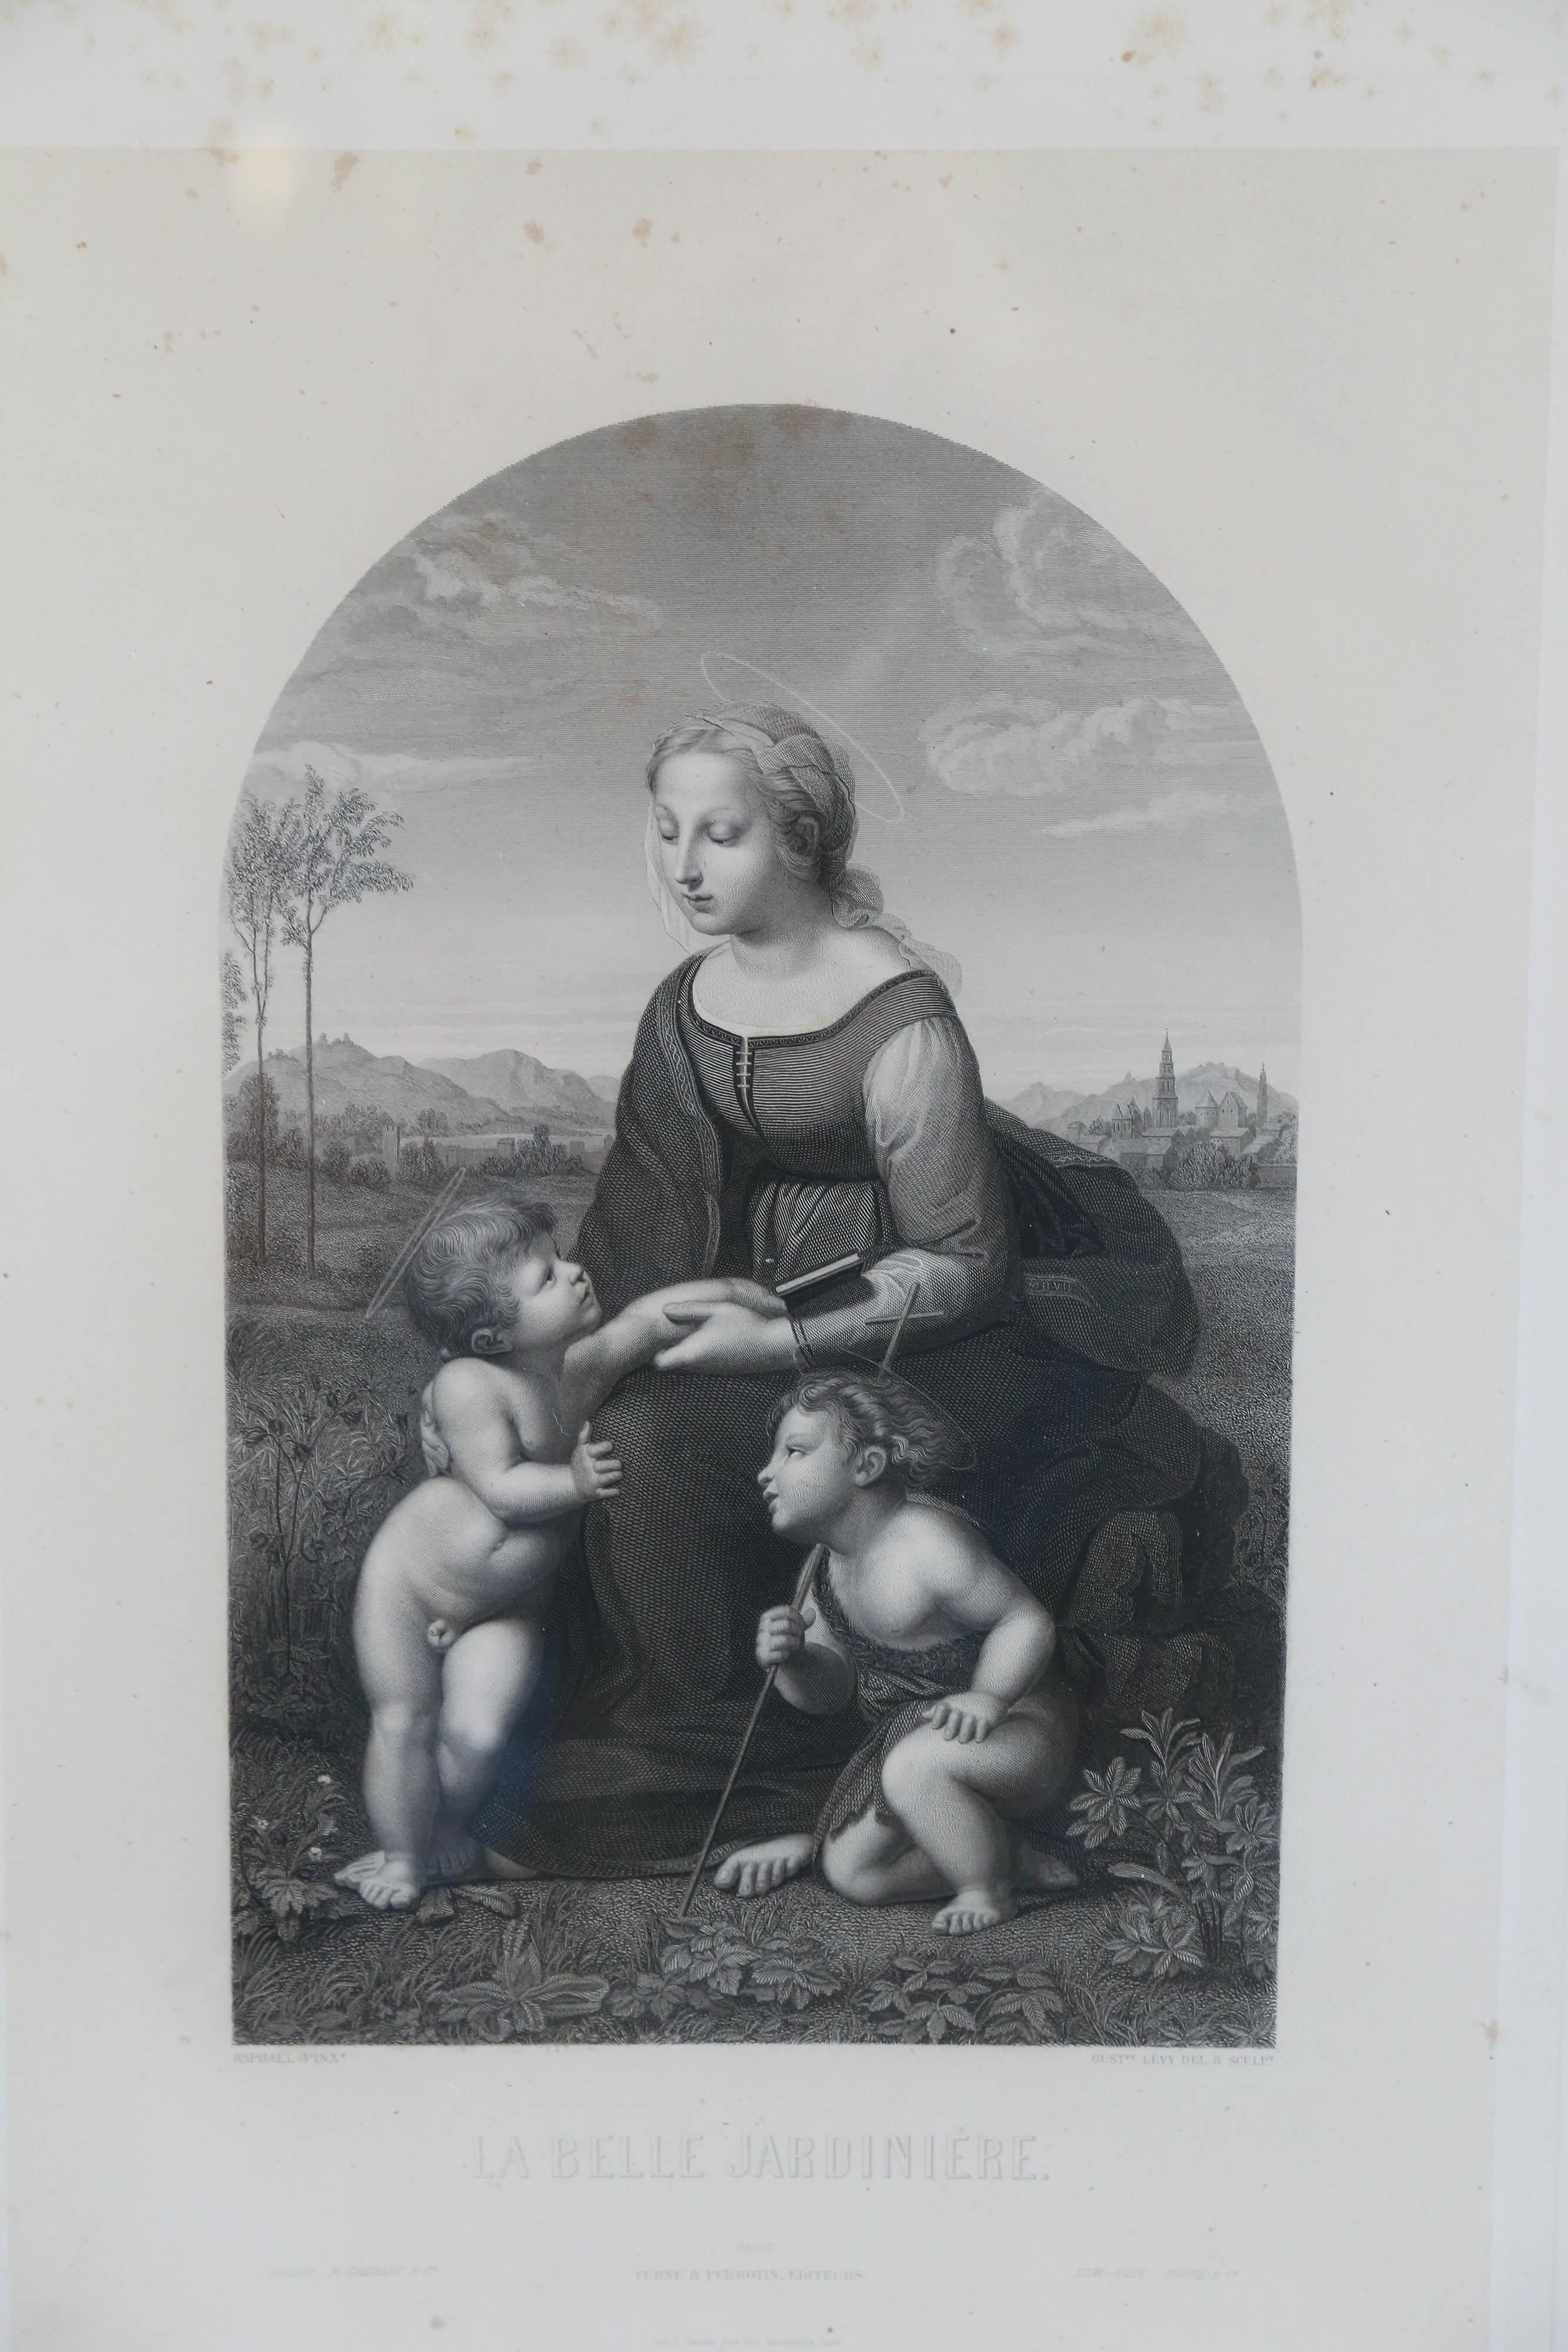 Suite of 11 Framed Engravings issued in 1850 by Furne & Perrotin.
They are all images originally painted by Raphael, mostly of The Madonna and Child.
They are all in archival frames .
One can be found in the Metropolitan Museum, in New